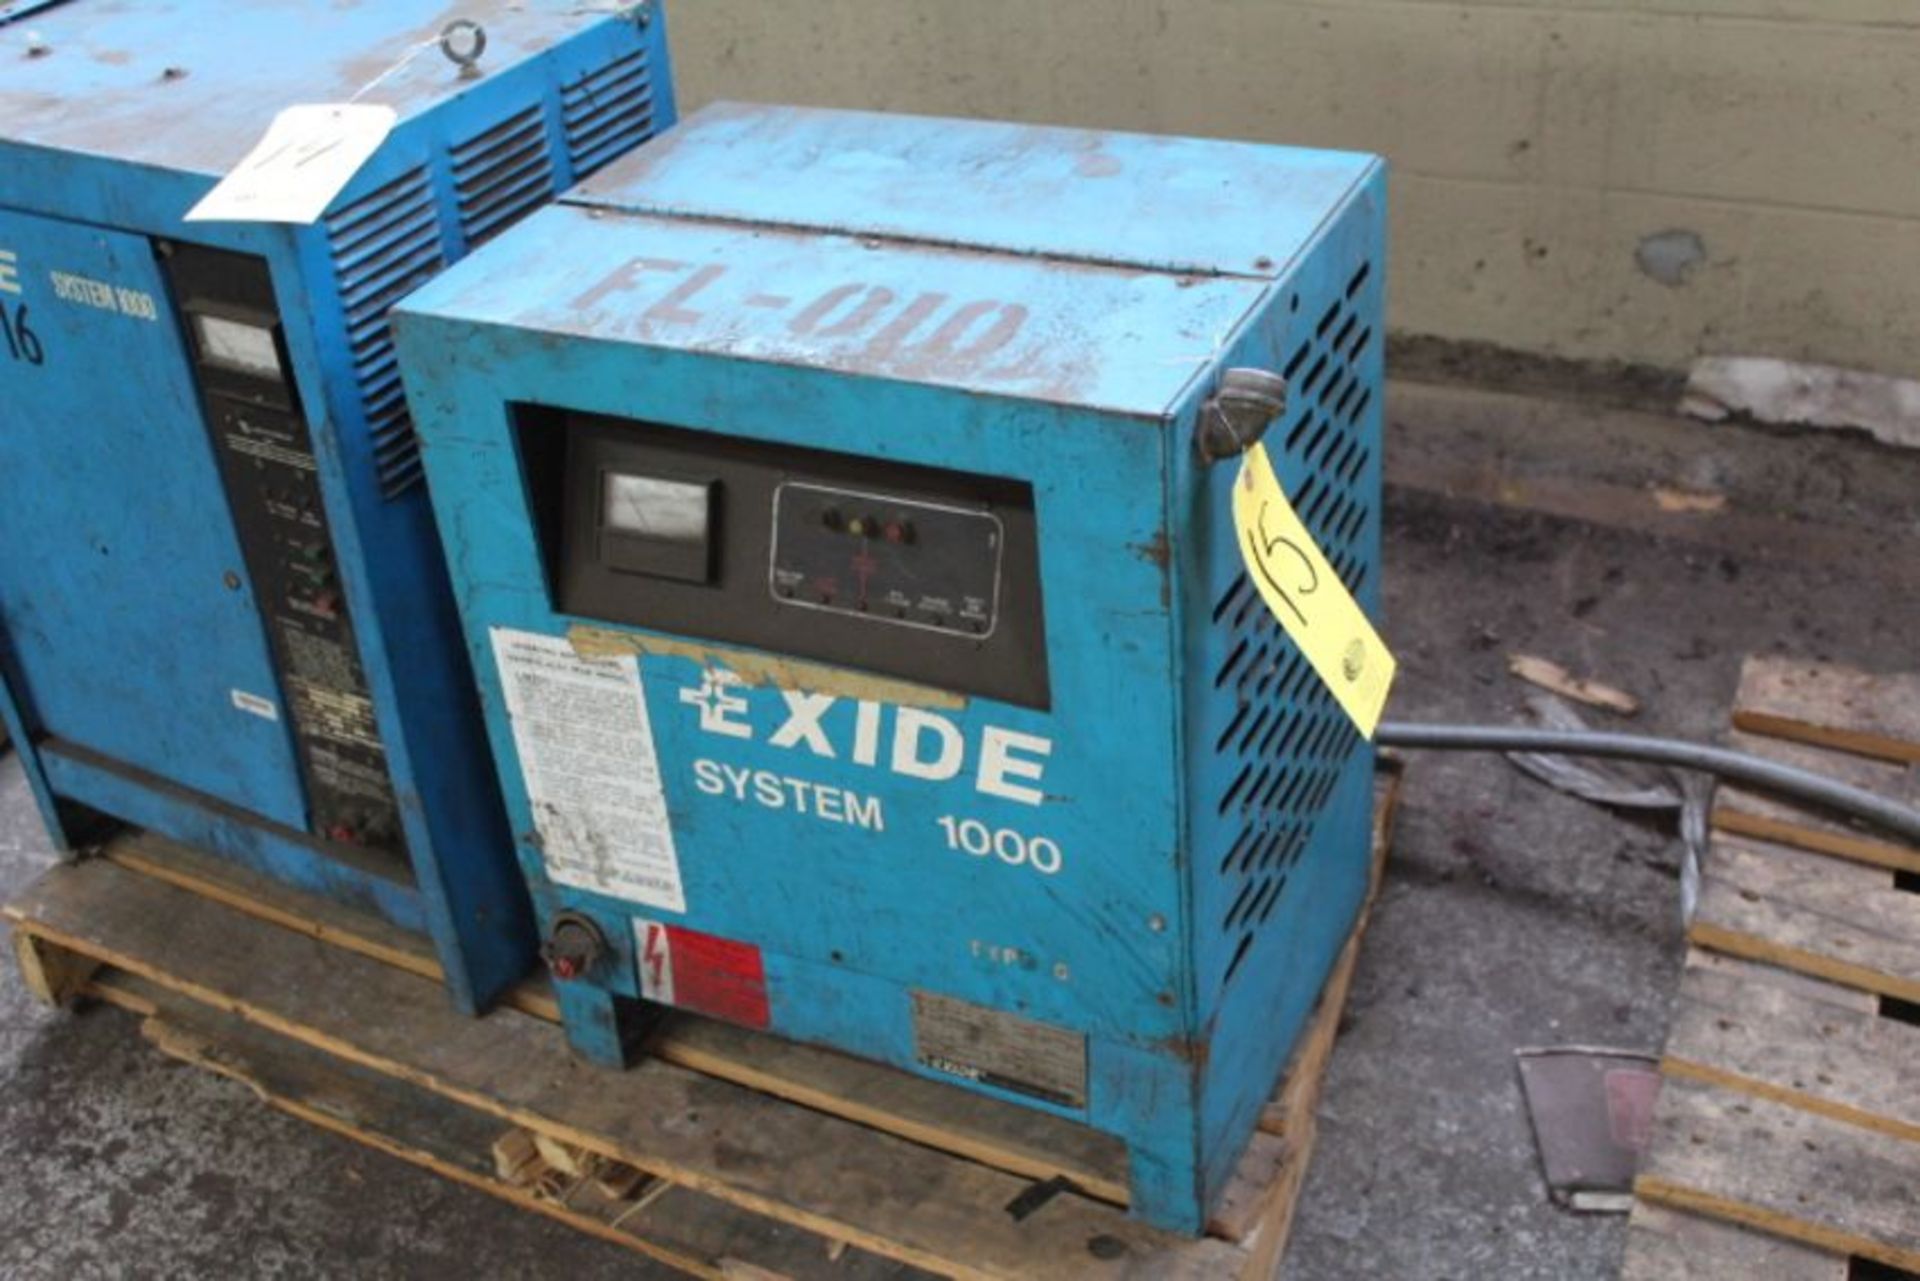 EXIDE SYSTEM 1000 BATTERY CHARGER - LEADS ARE CUT AS-IS